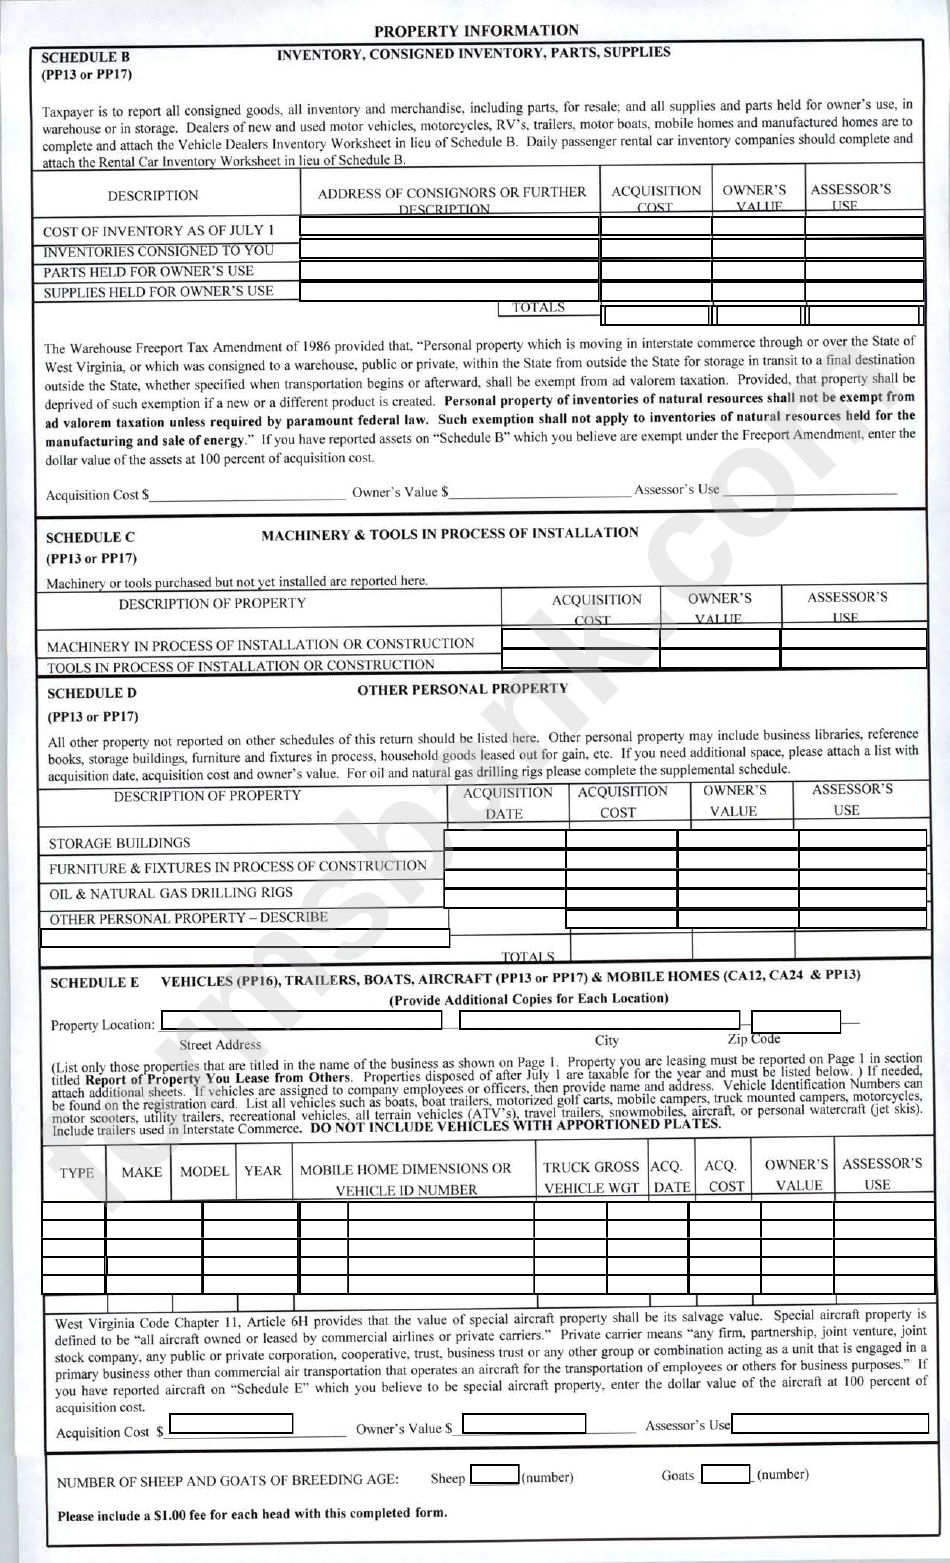 Form Stc 12:32c - Commercial Business Property Return - Office Of County Assessor